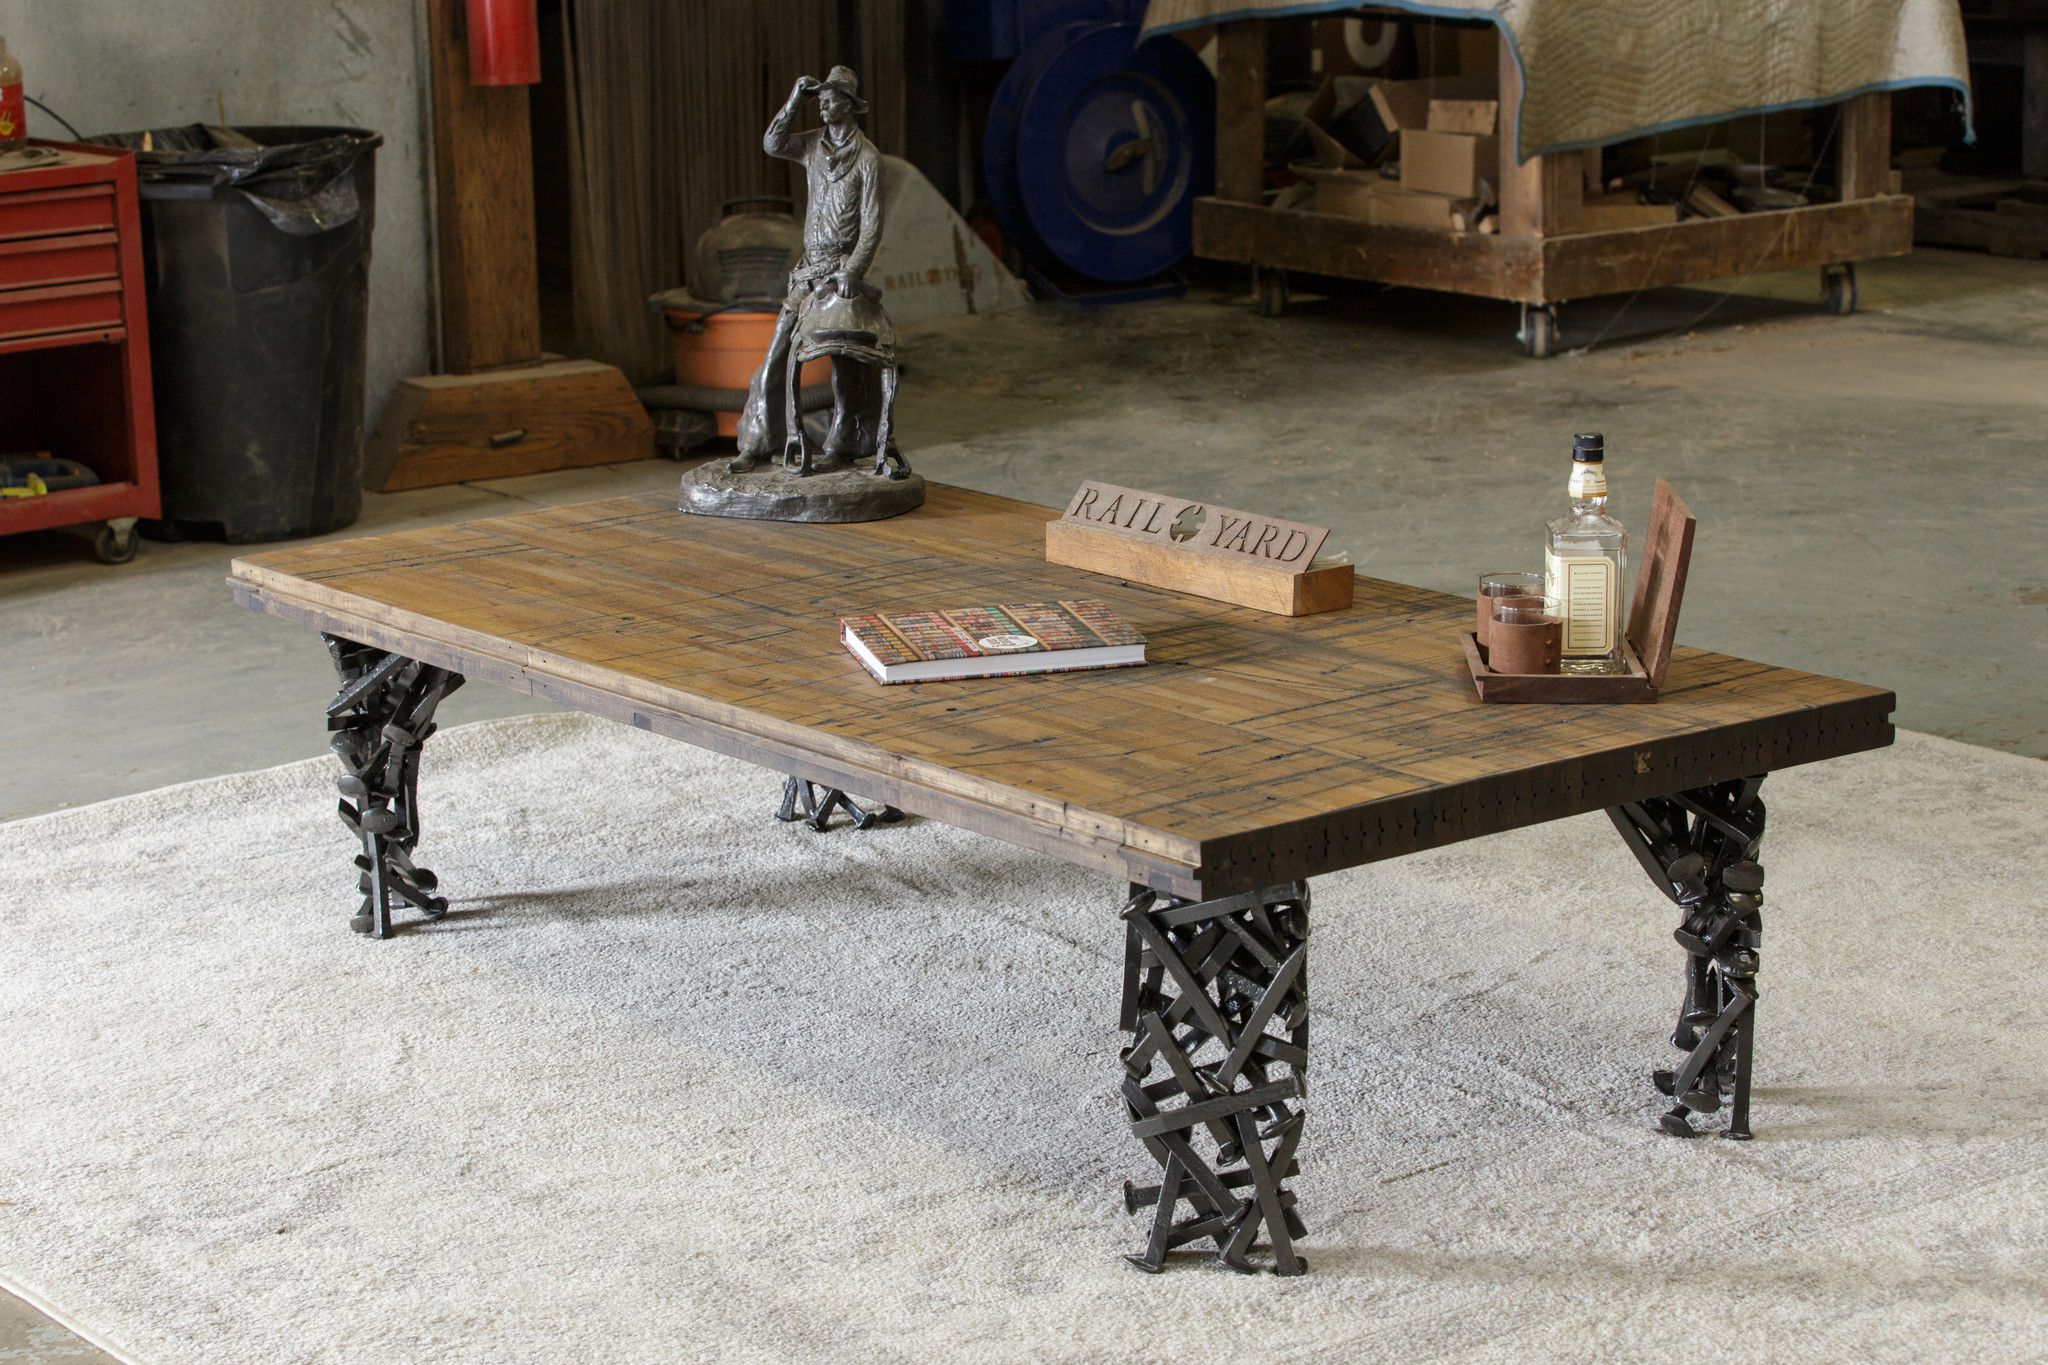 Railroad-themed industrial style rectangular coffee table